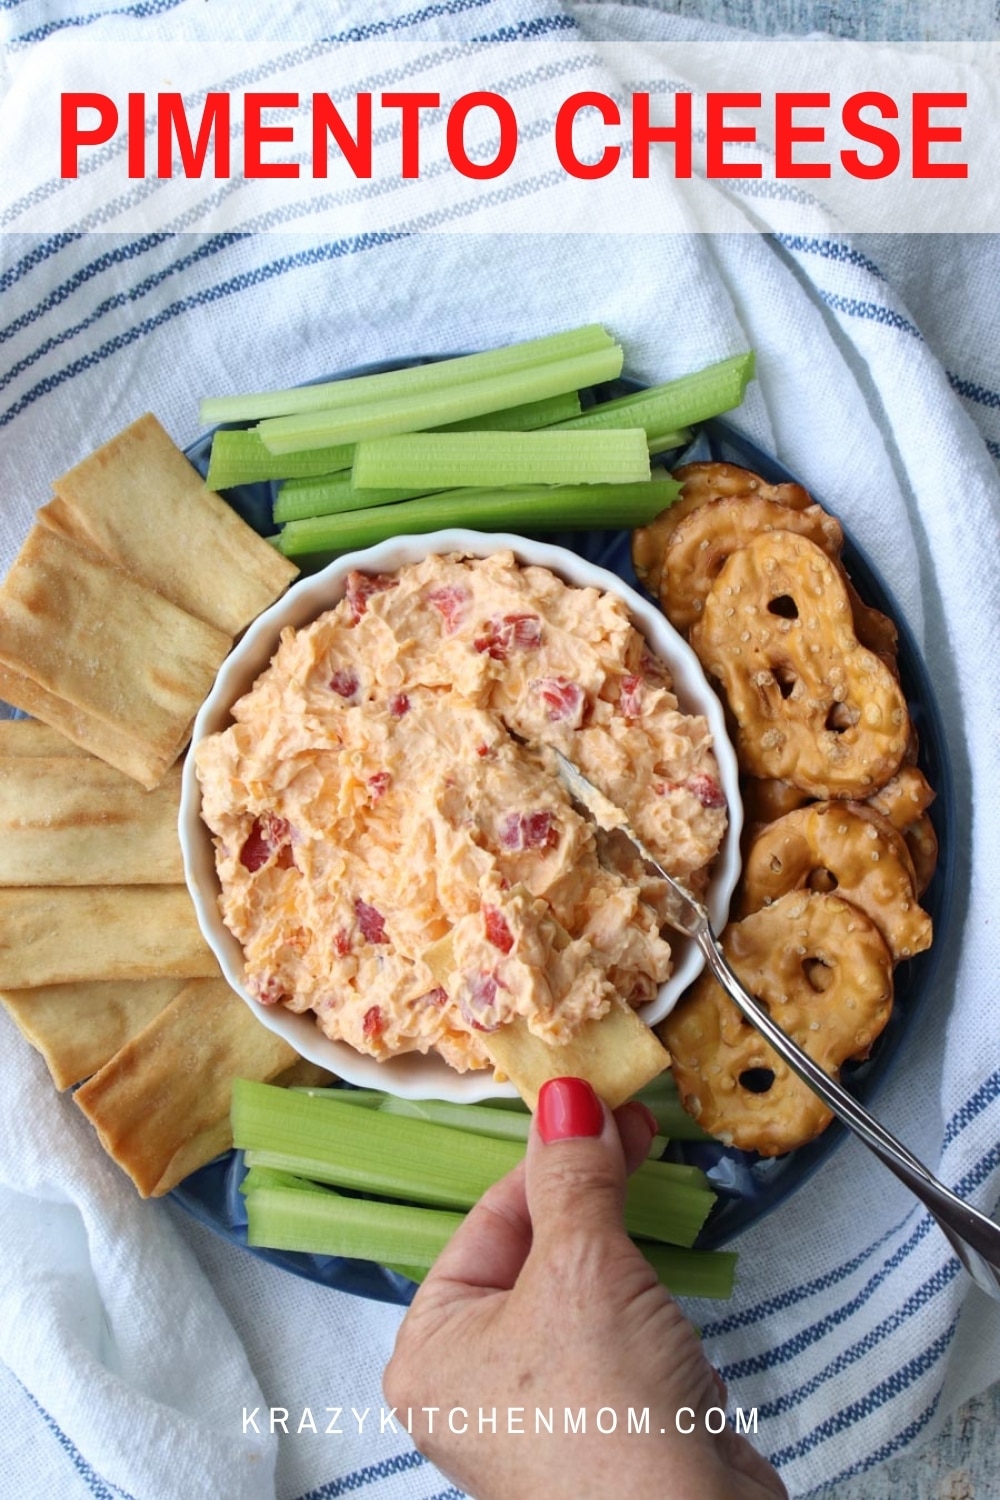 Homemade Southern Style Pimento Cheese is ready in 5 minutes. It's so good, you'll want to keep a jar in the refrigerator all the time. via @krazykitchenmom